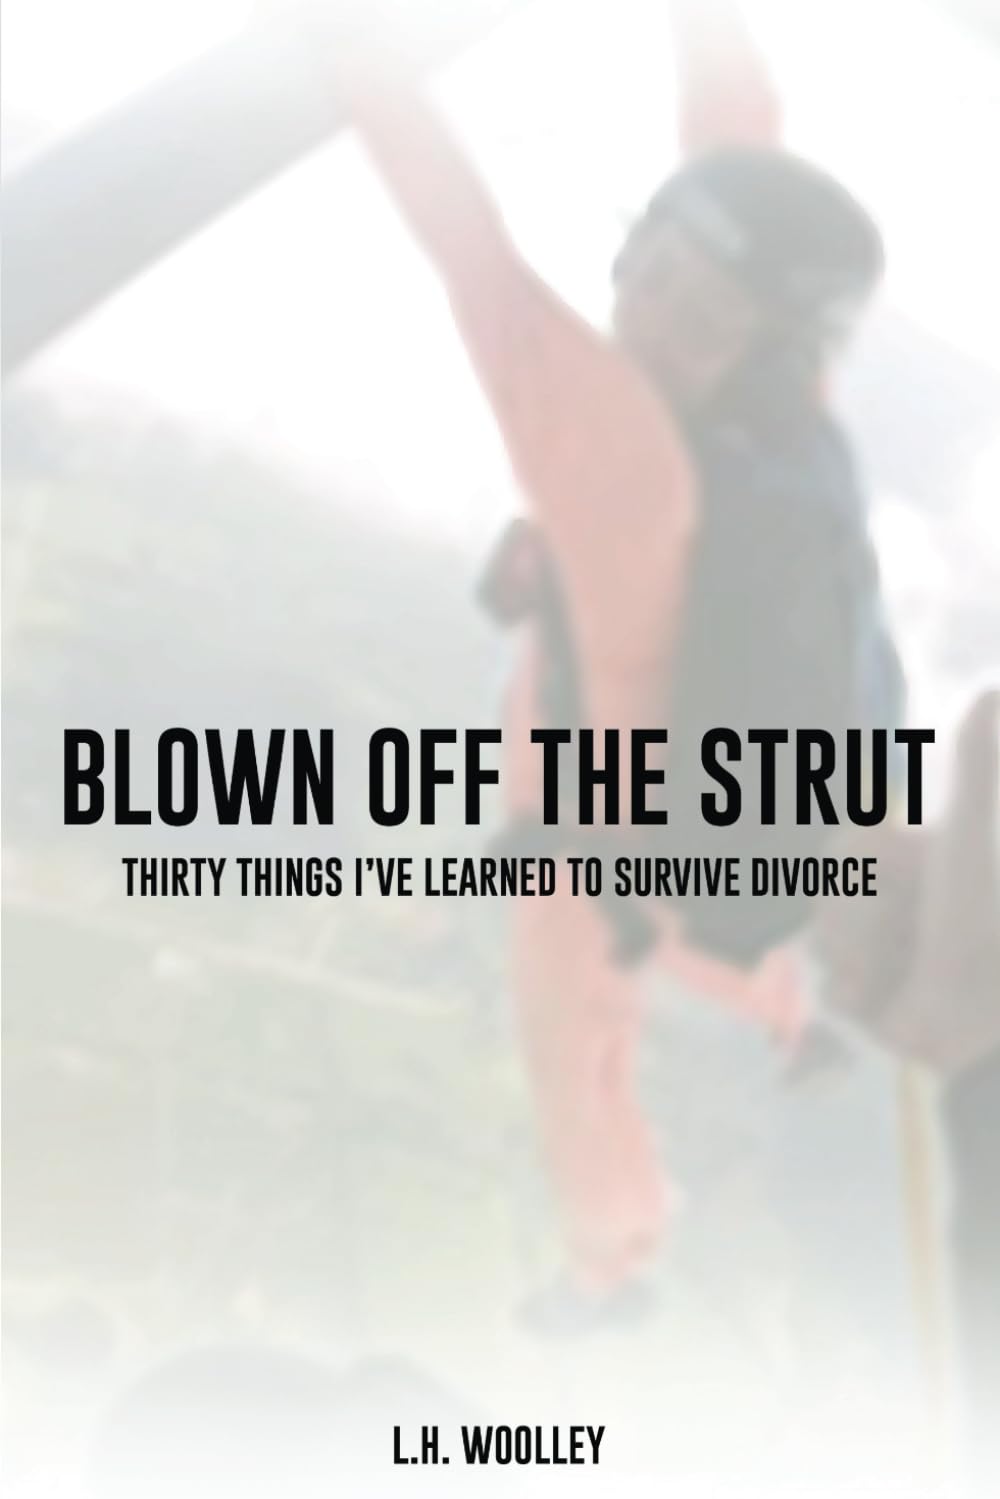 Embark on a Journey of Resilience and Hope with “Blown off the Strut” 14